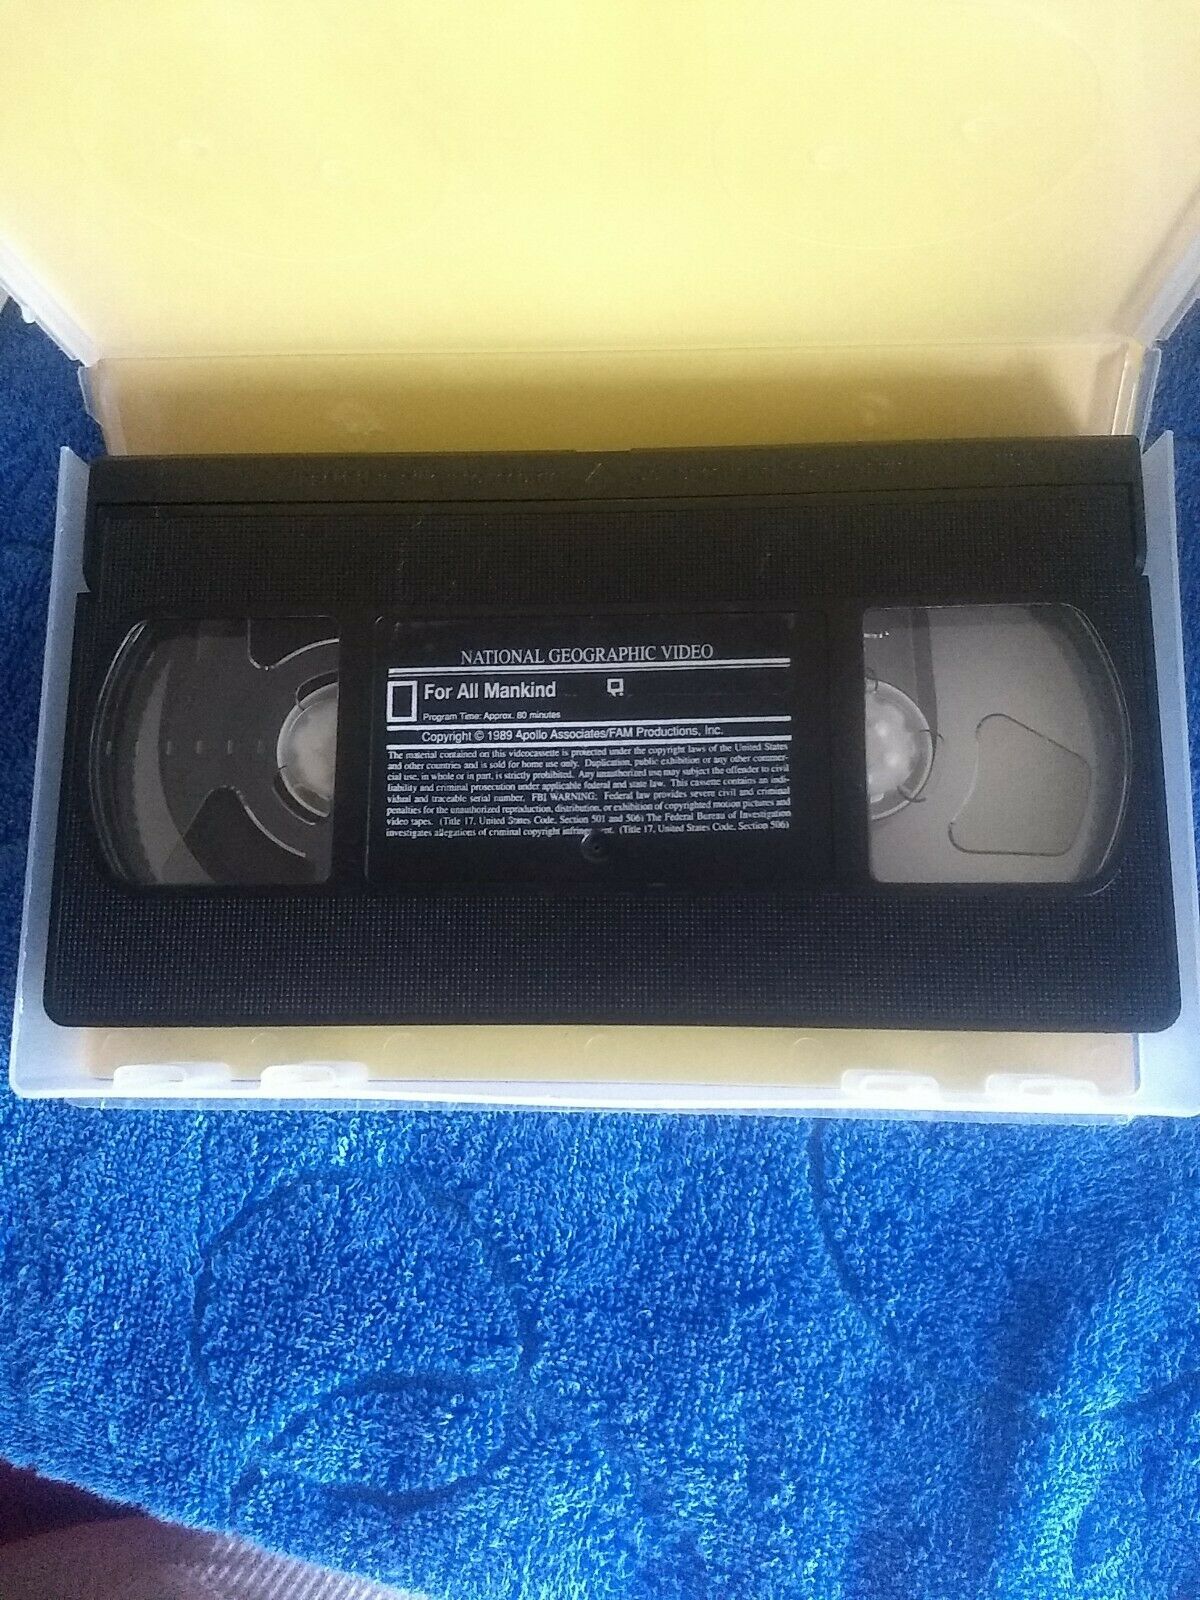 National Geographic Video Vhs For All Mankind and similar items